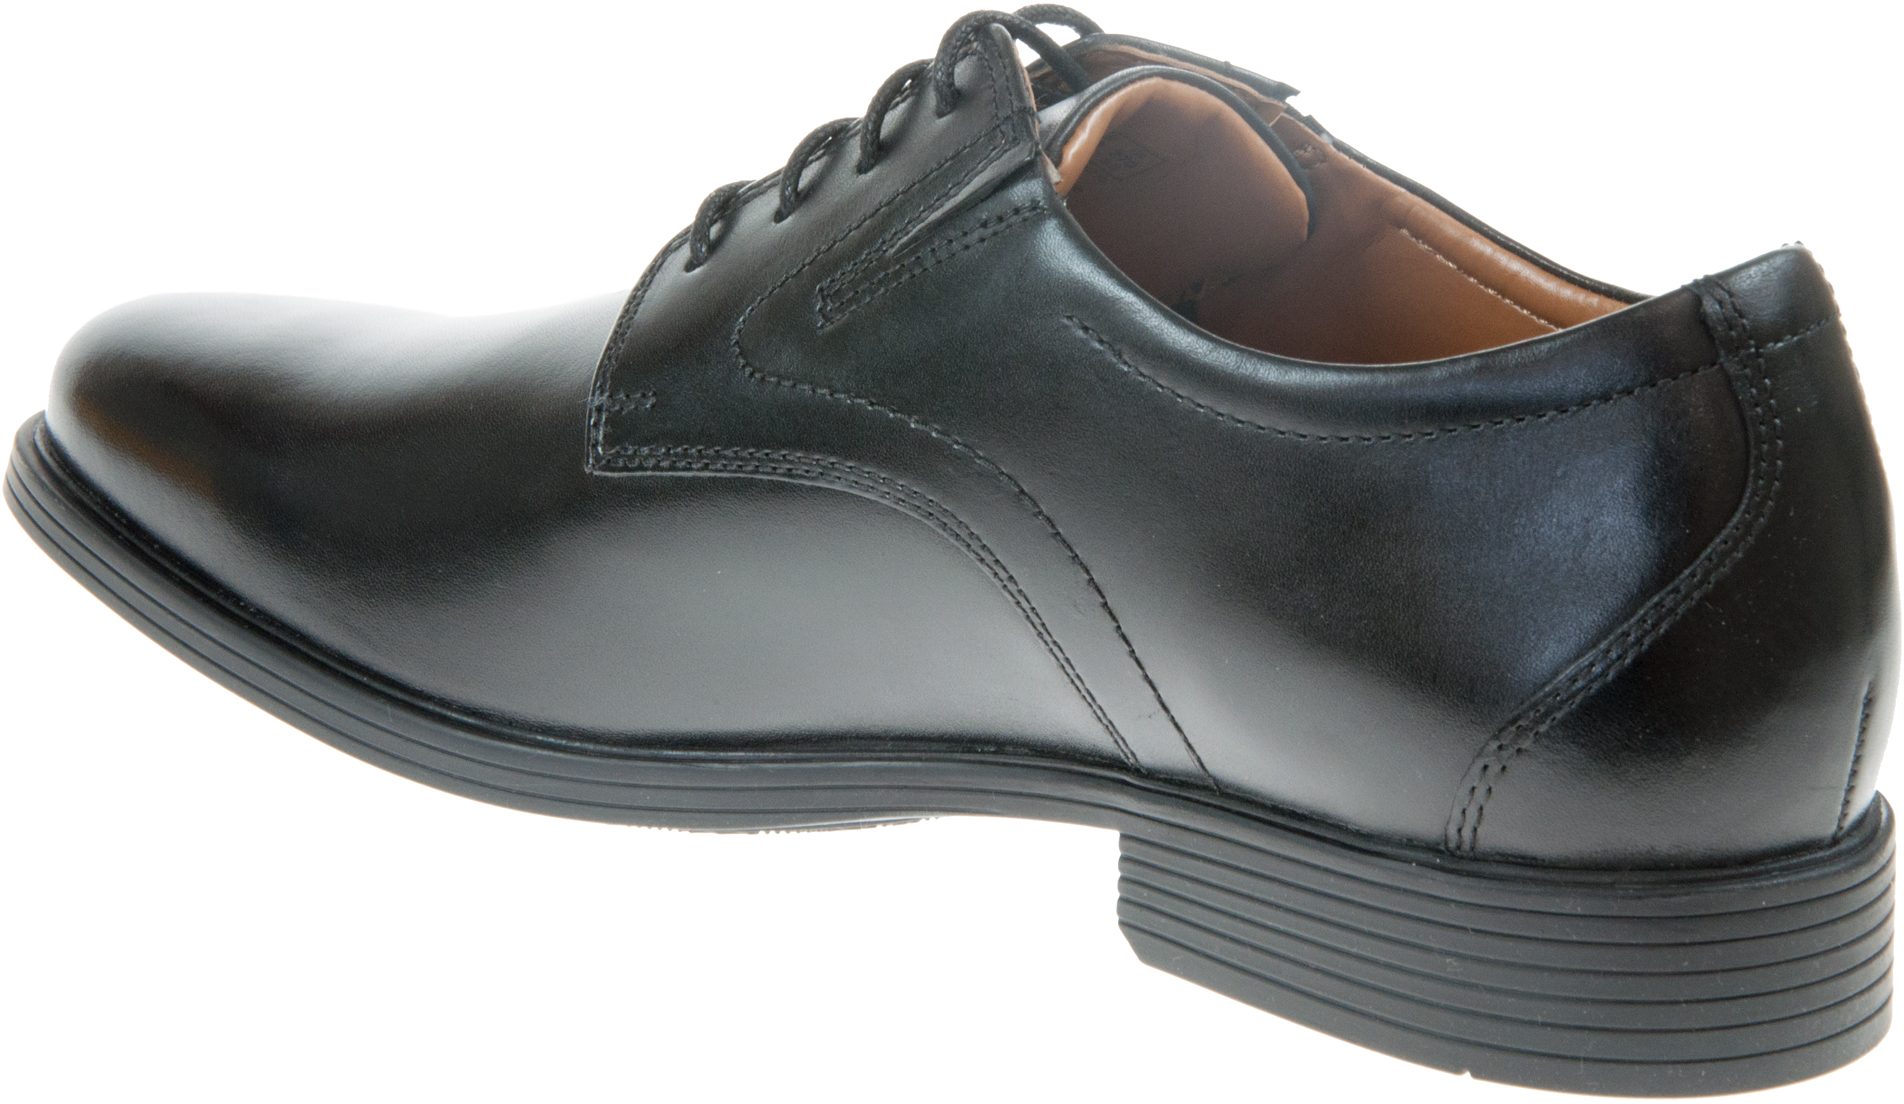 Clarks Whiddon Plain Black Leather 26152918 - Formal Shoes - Humphries ...